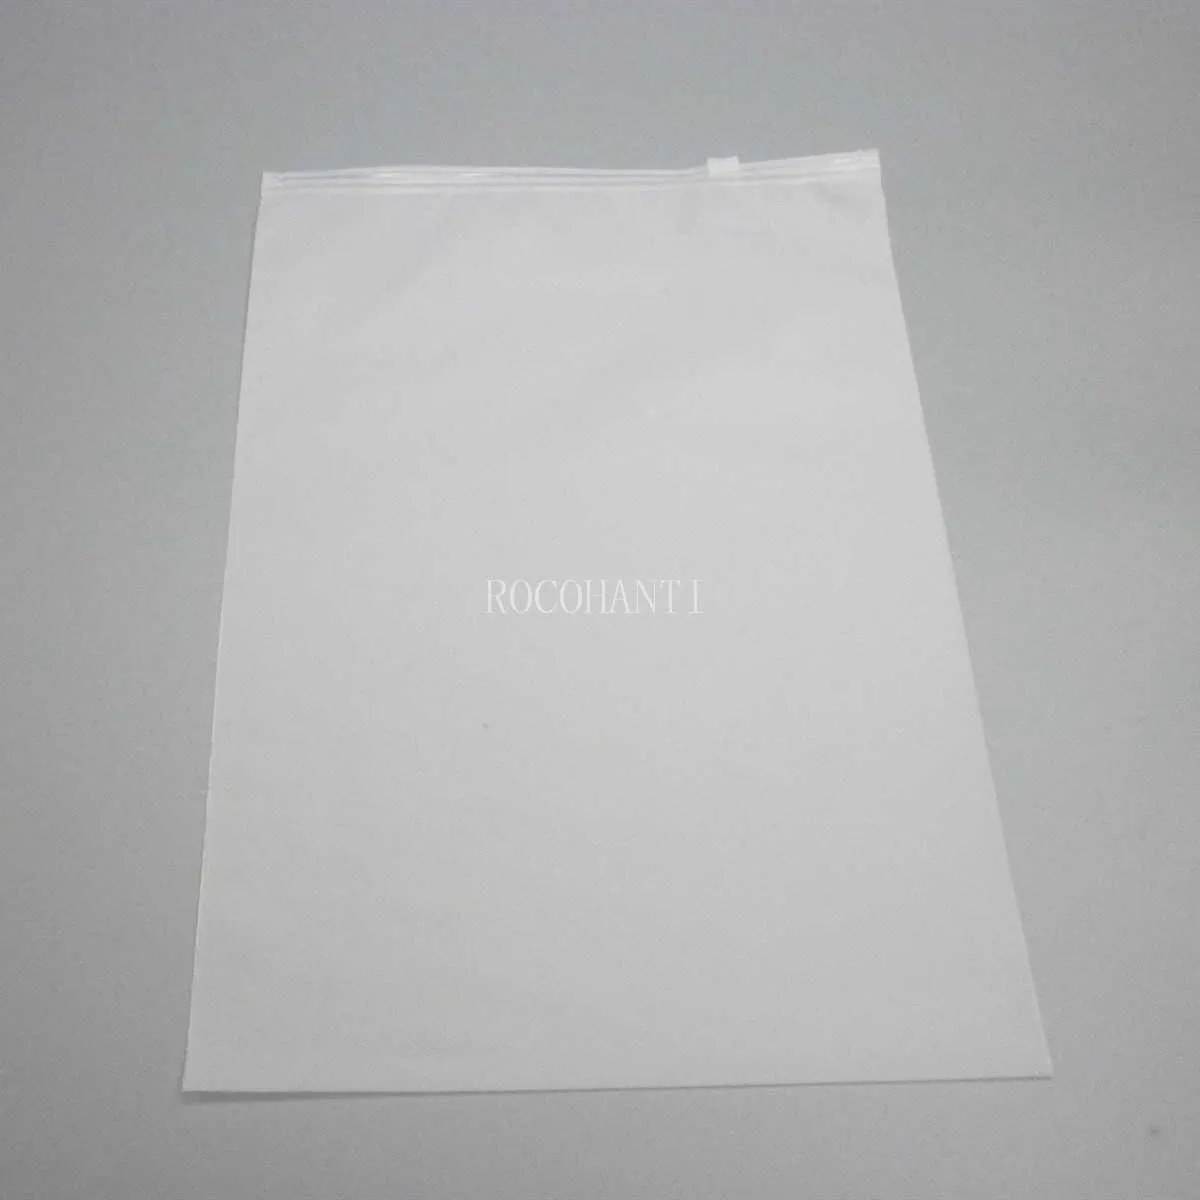 100X Zip lock Zipper Top frosted plastic bags for clothing T-Shirt Skirt retail packaging storage bag customized printing Y0712313W